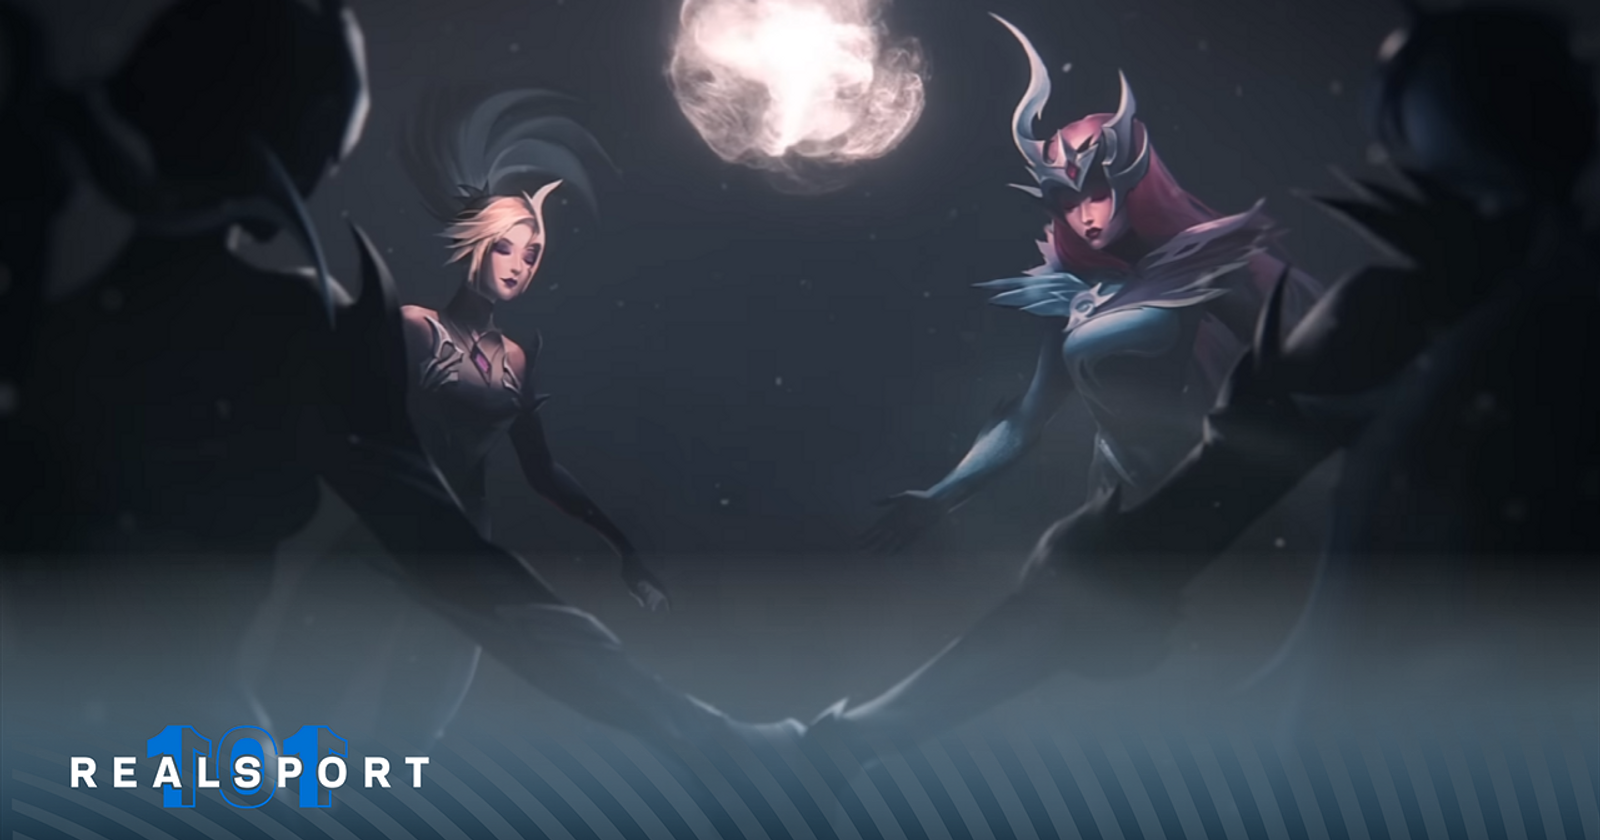 LoL 2023 Coven Skins full revealed: Splash Arts, Prices, Release Date, and  More - Not A Gamer